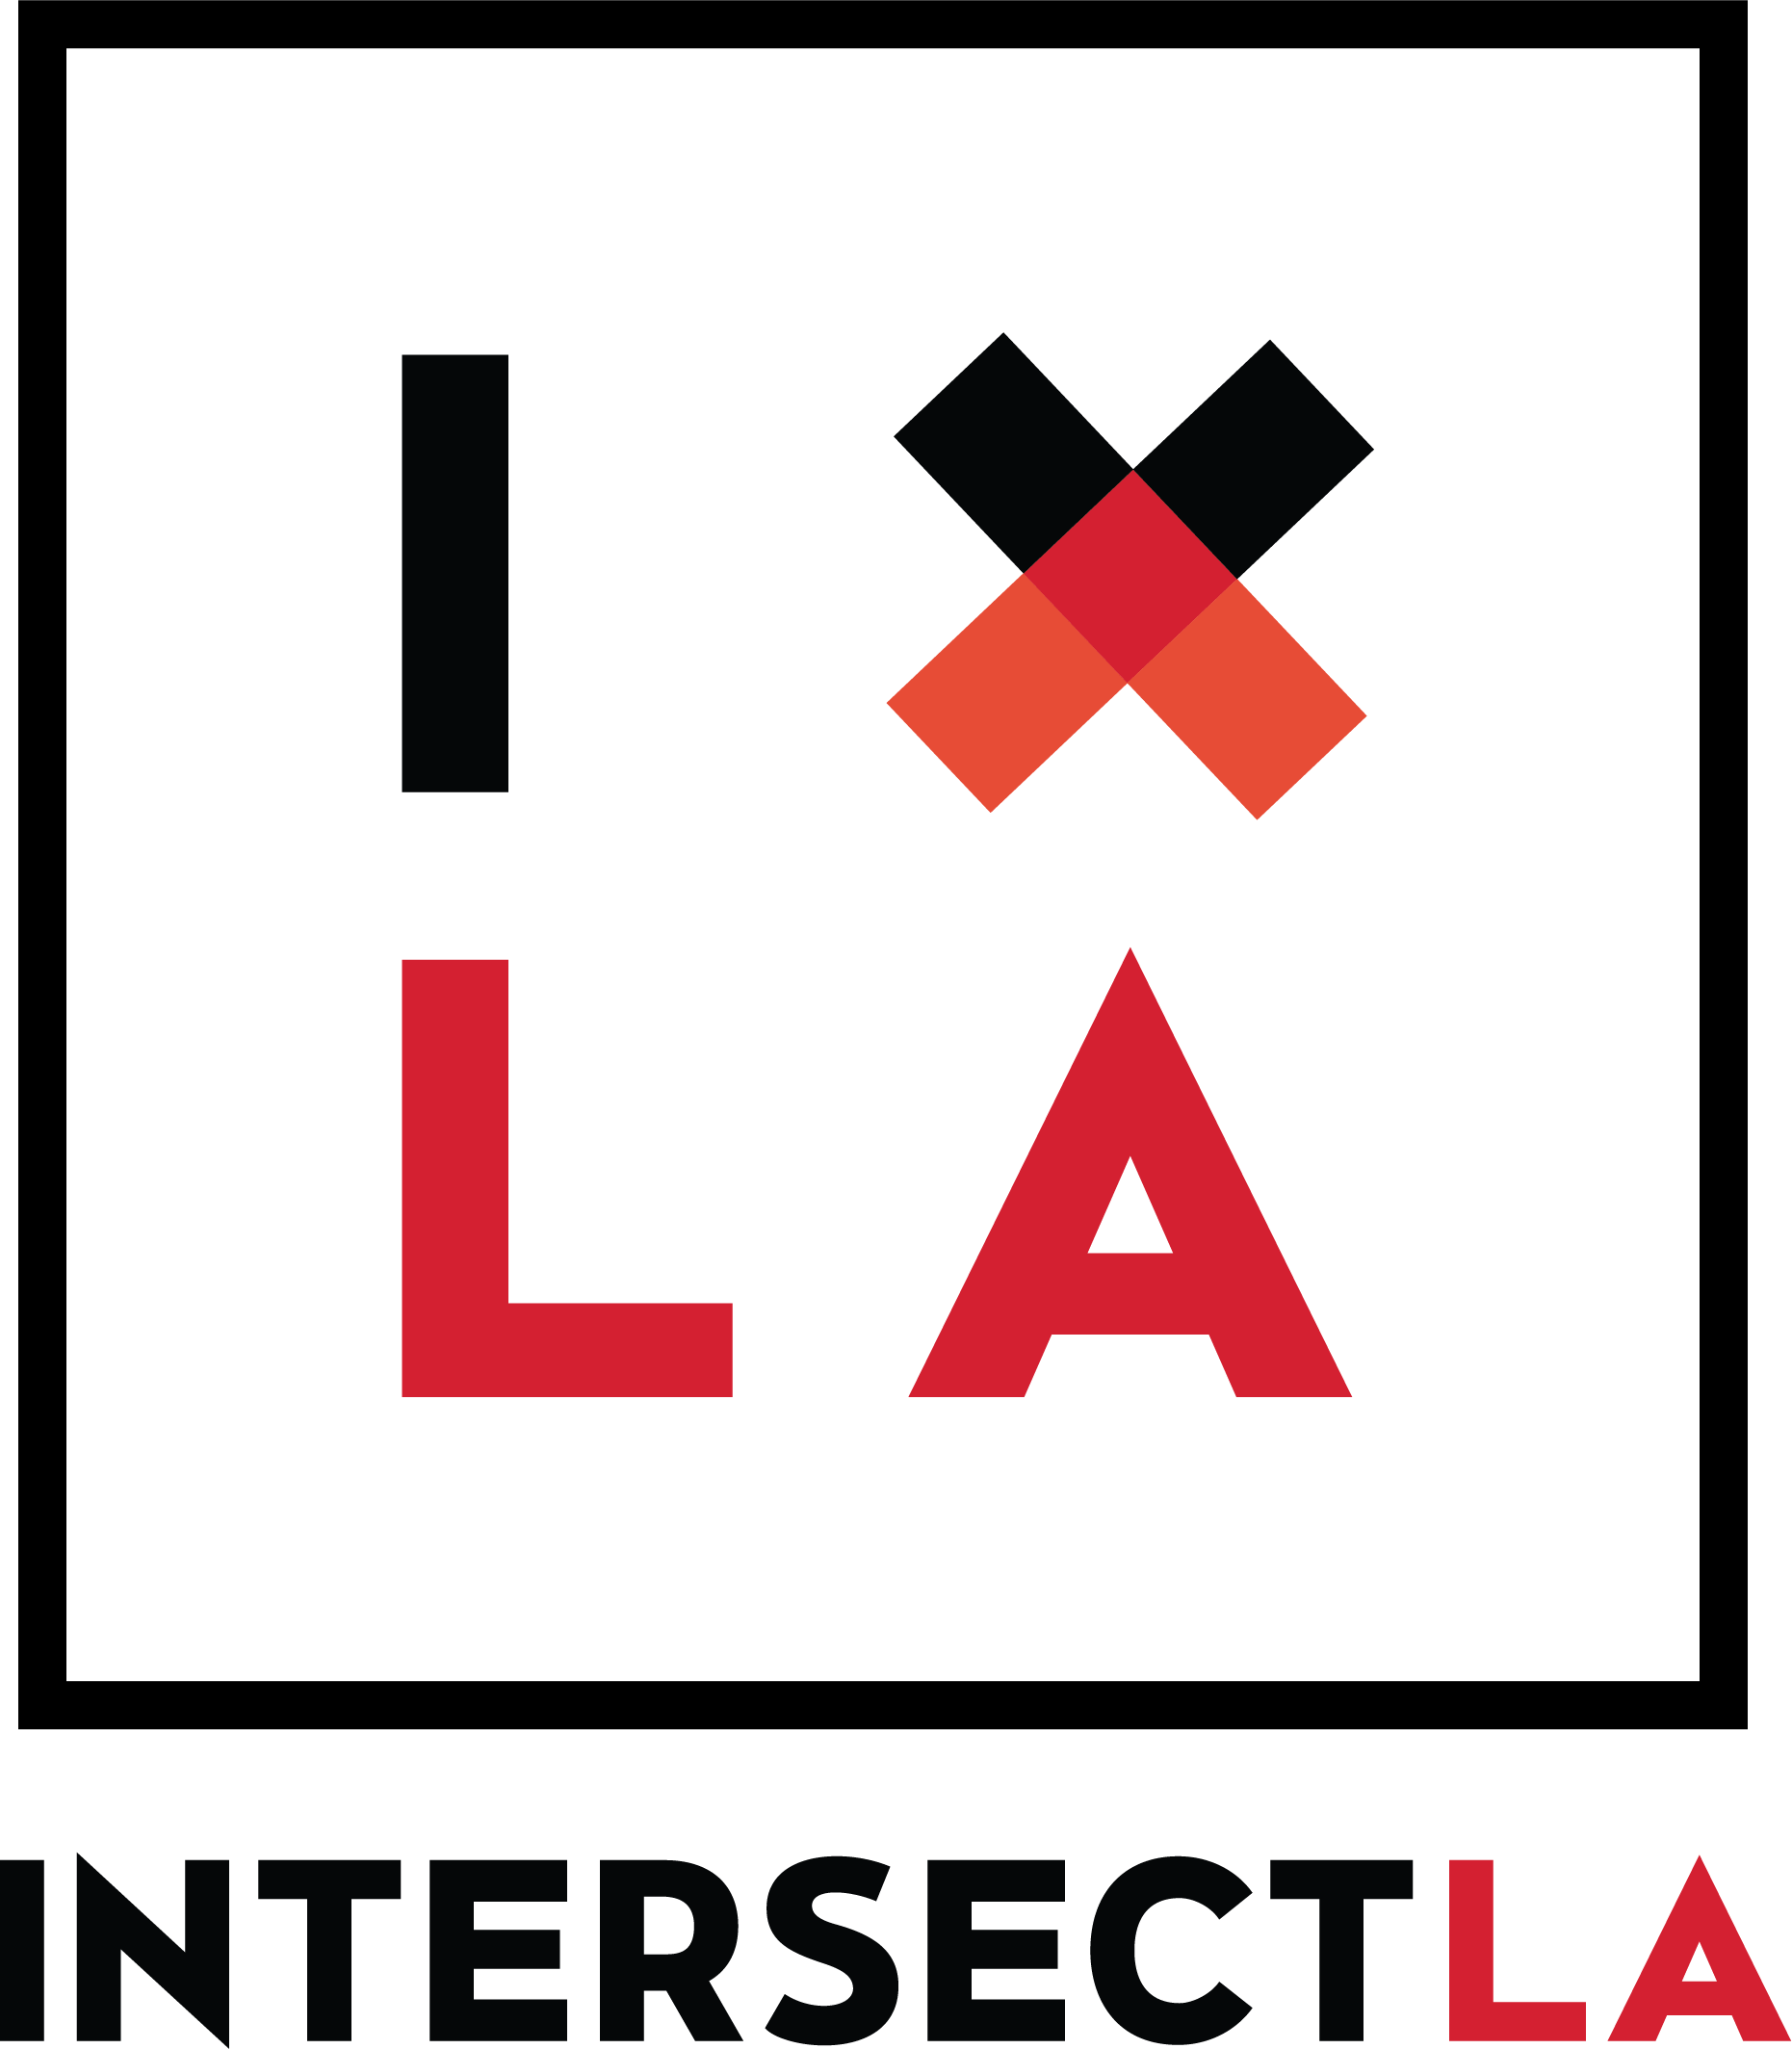 https://talenthubs.org/wp-content/uploads/2022/01/ixla-new-logo.png